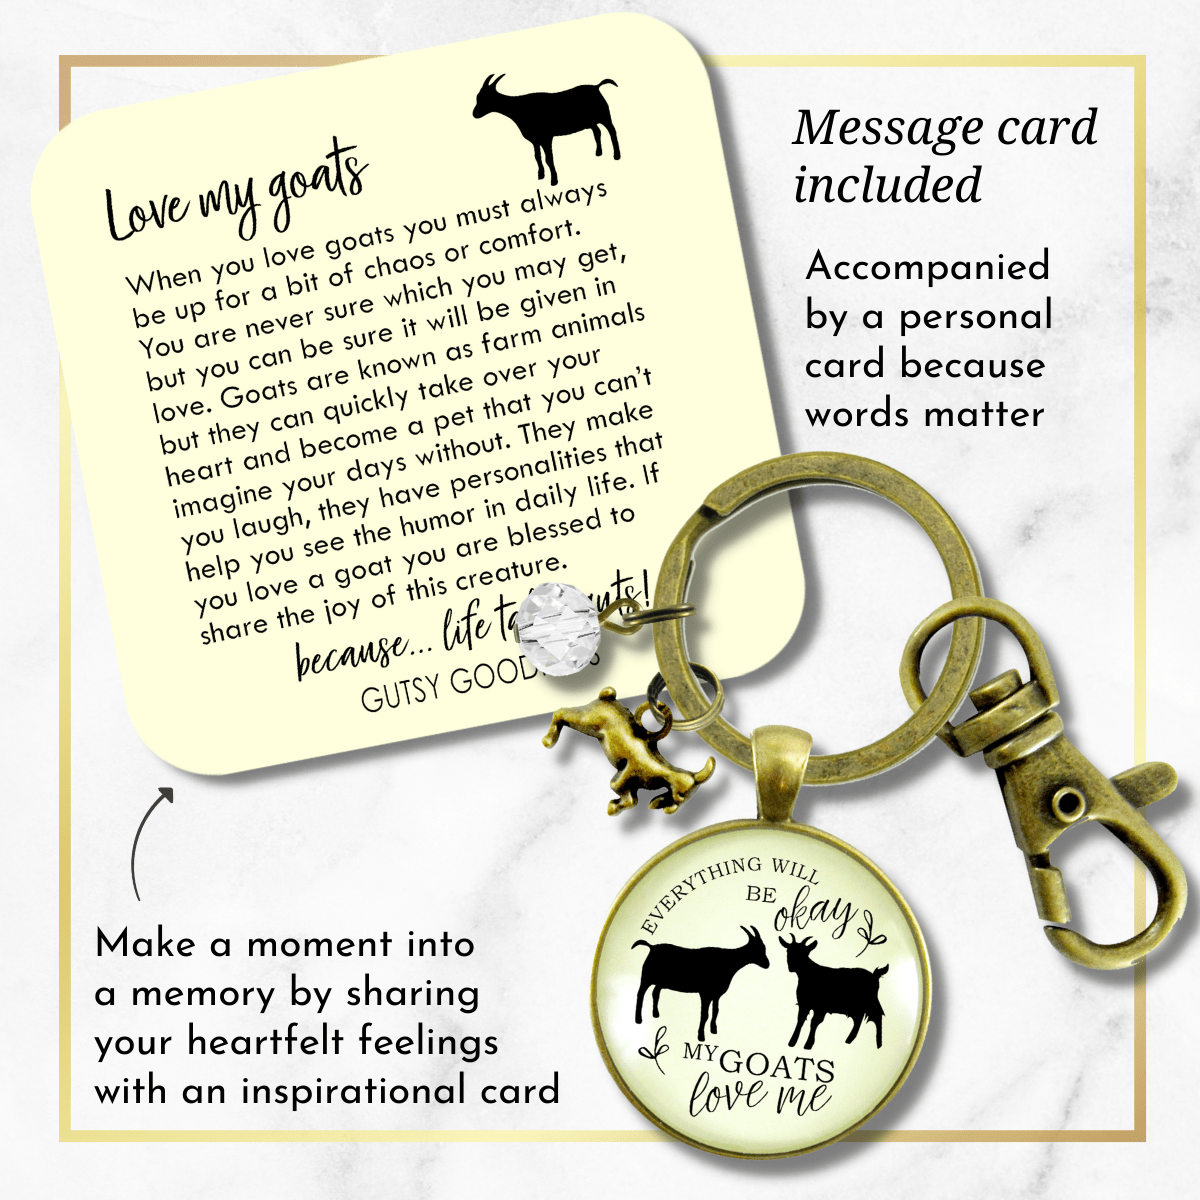 Goats Keychain All is Okay My Goats Love Me Farm Inspired Jewelry - Gutsy Goodness Handmade Jewelry;Goats Keychain All Is Okay My Goats Love Me Farm Inspired Jewelry - Gutsy Goodness Handmade Jewelry Gifts